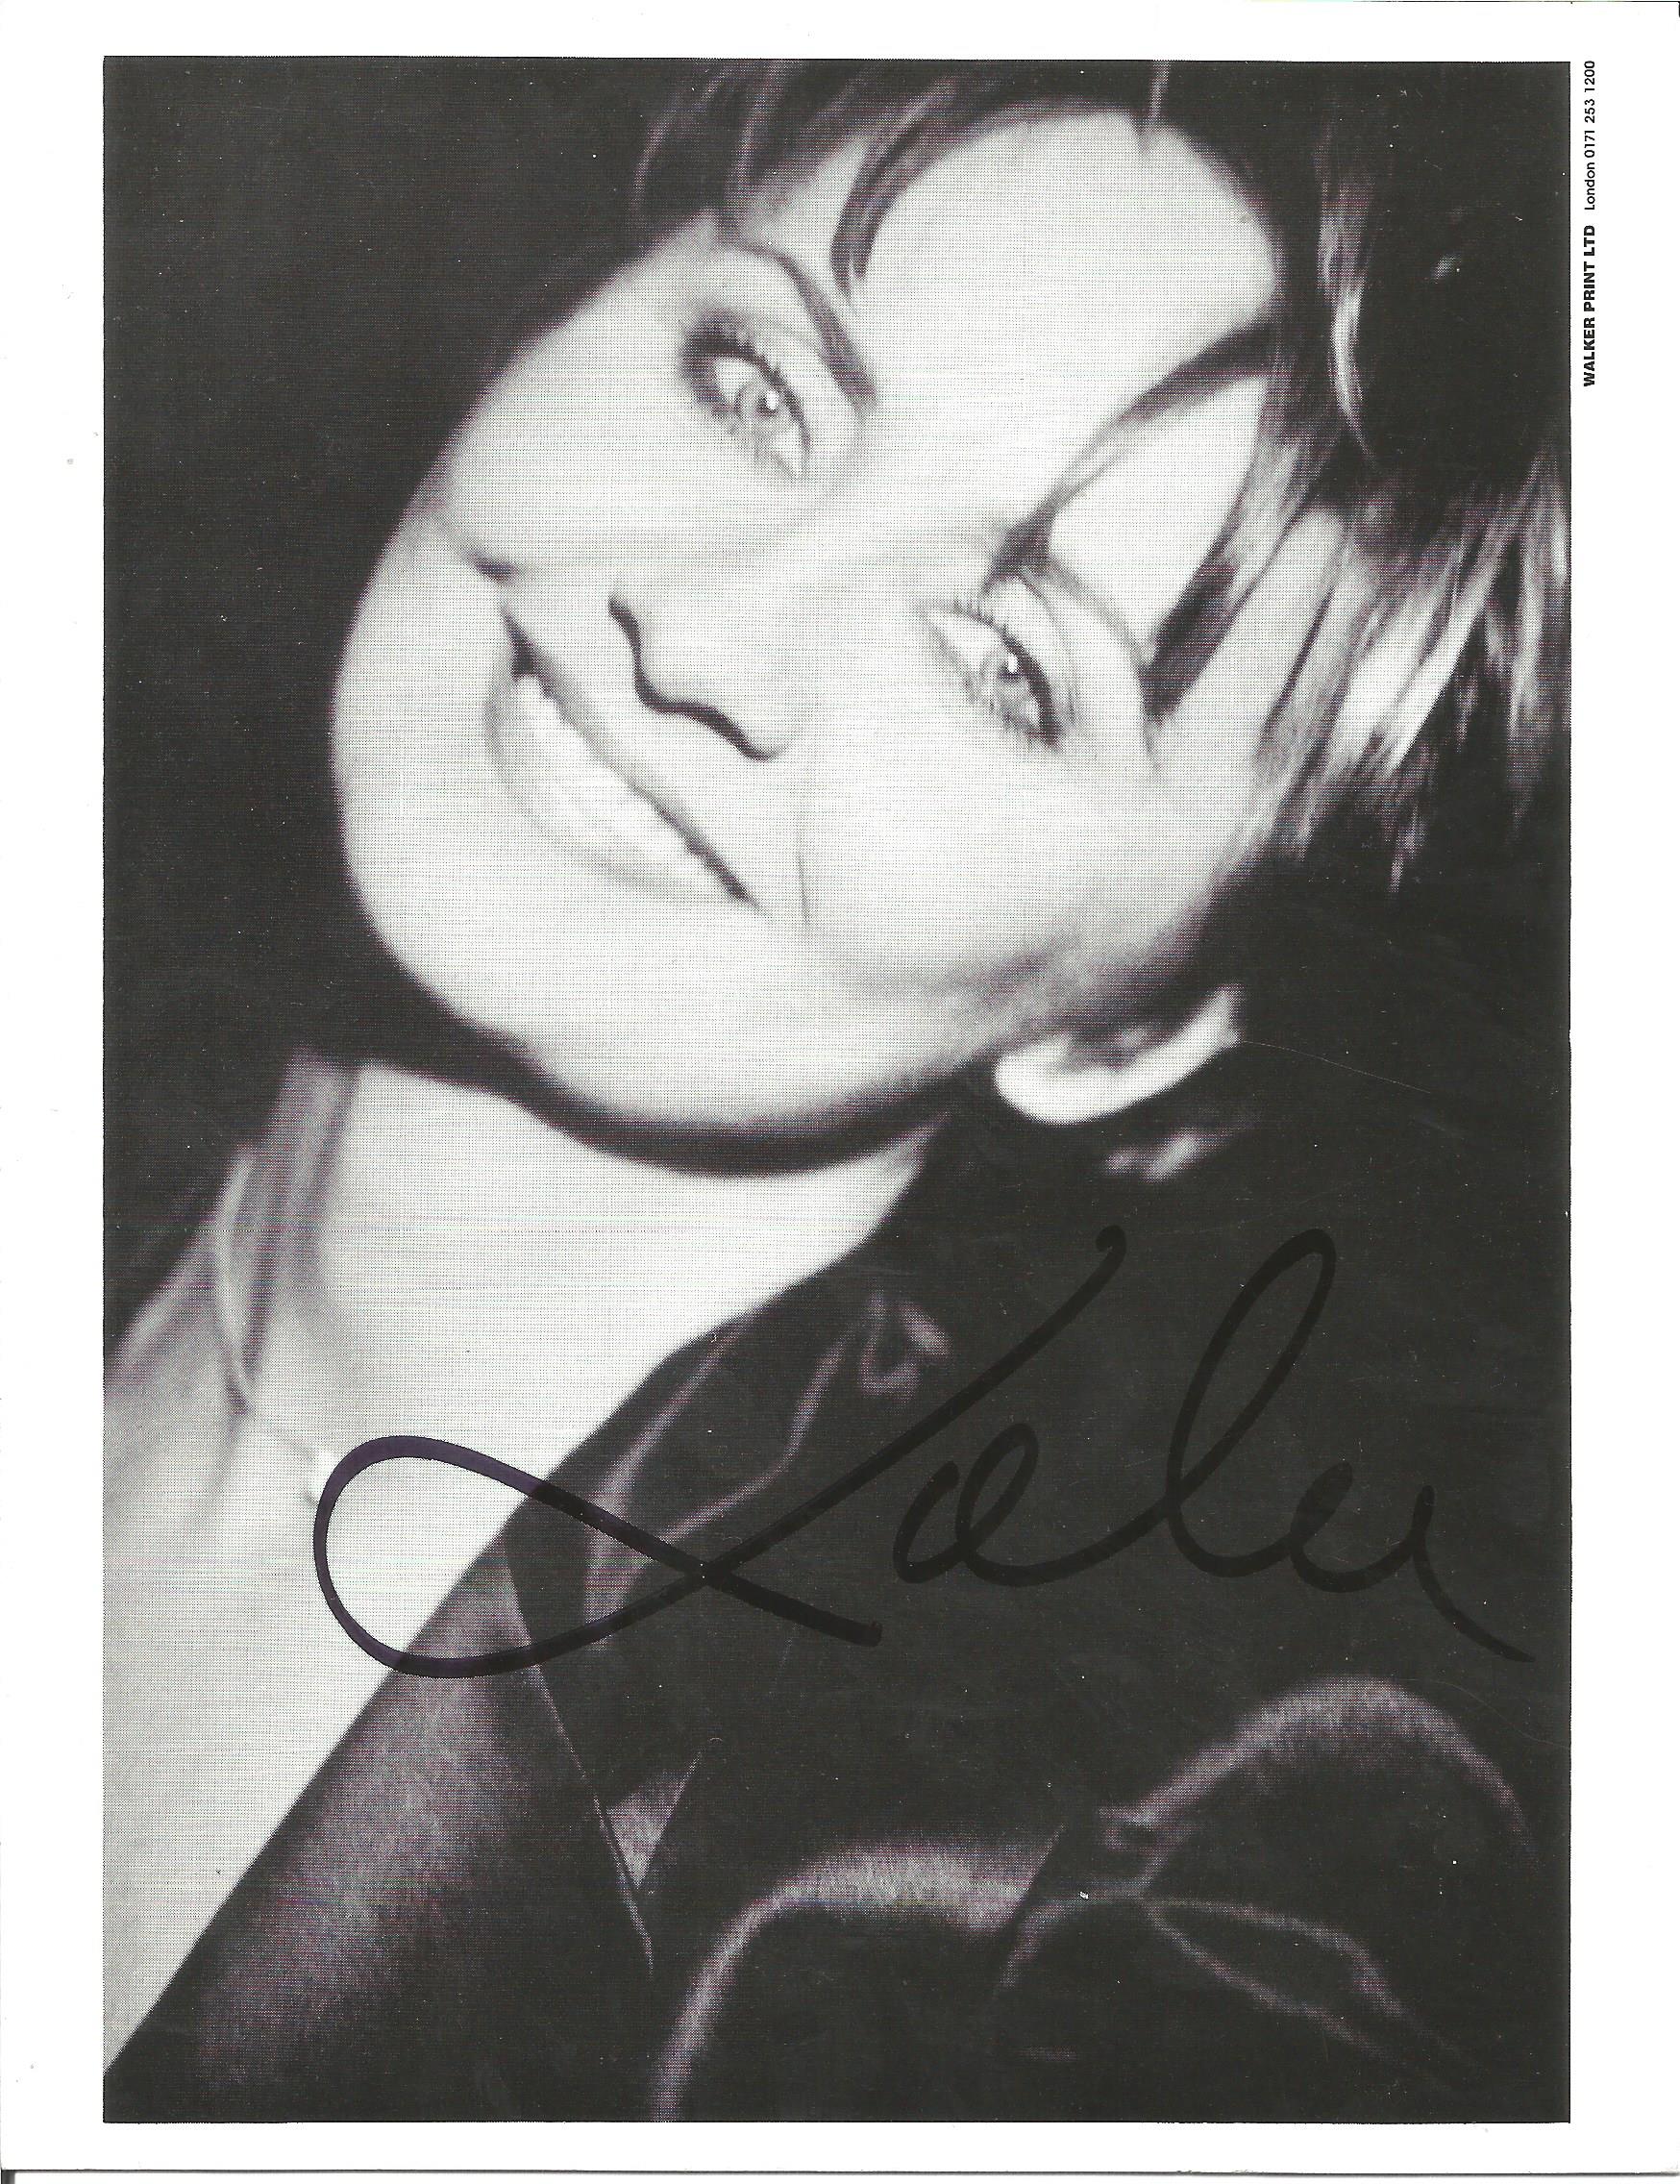 Lulu Singer Signed 6x8 Photo. Good Condition. All signed pieces come with a Certificate of